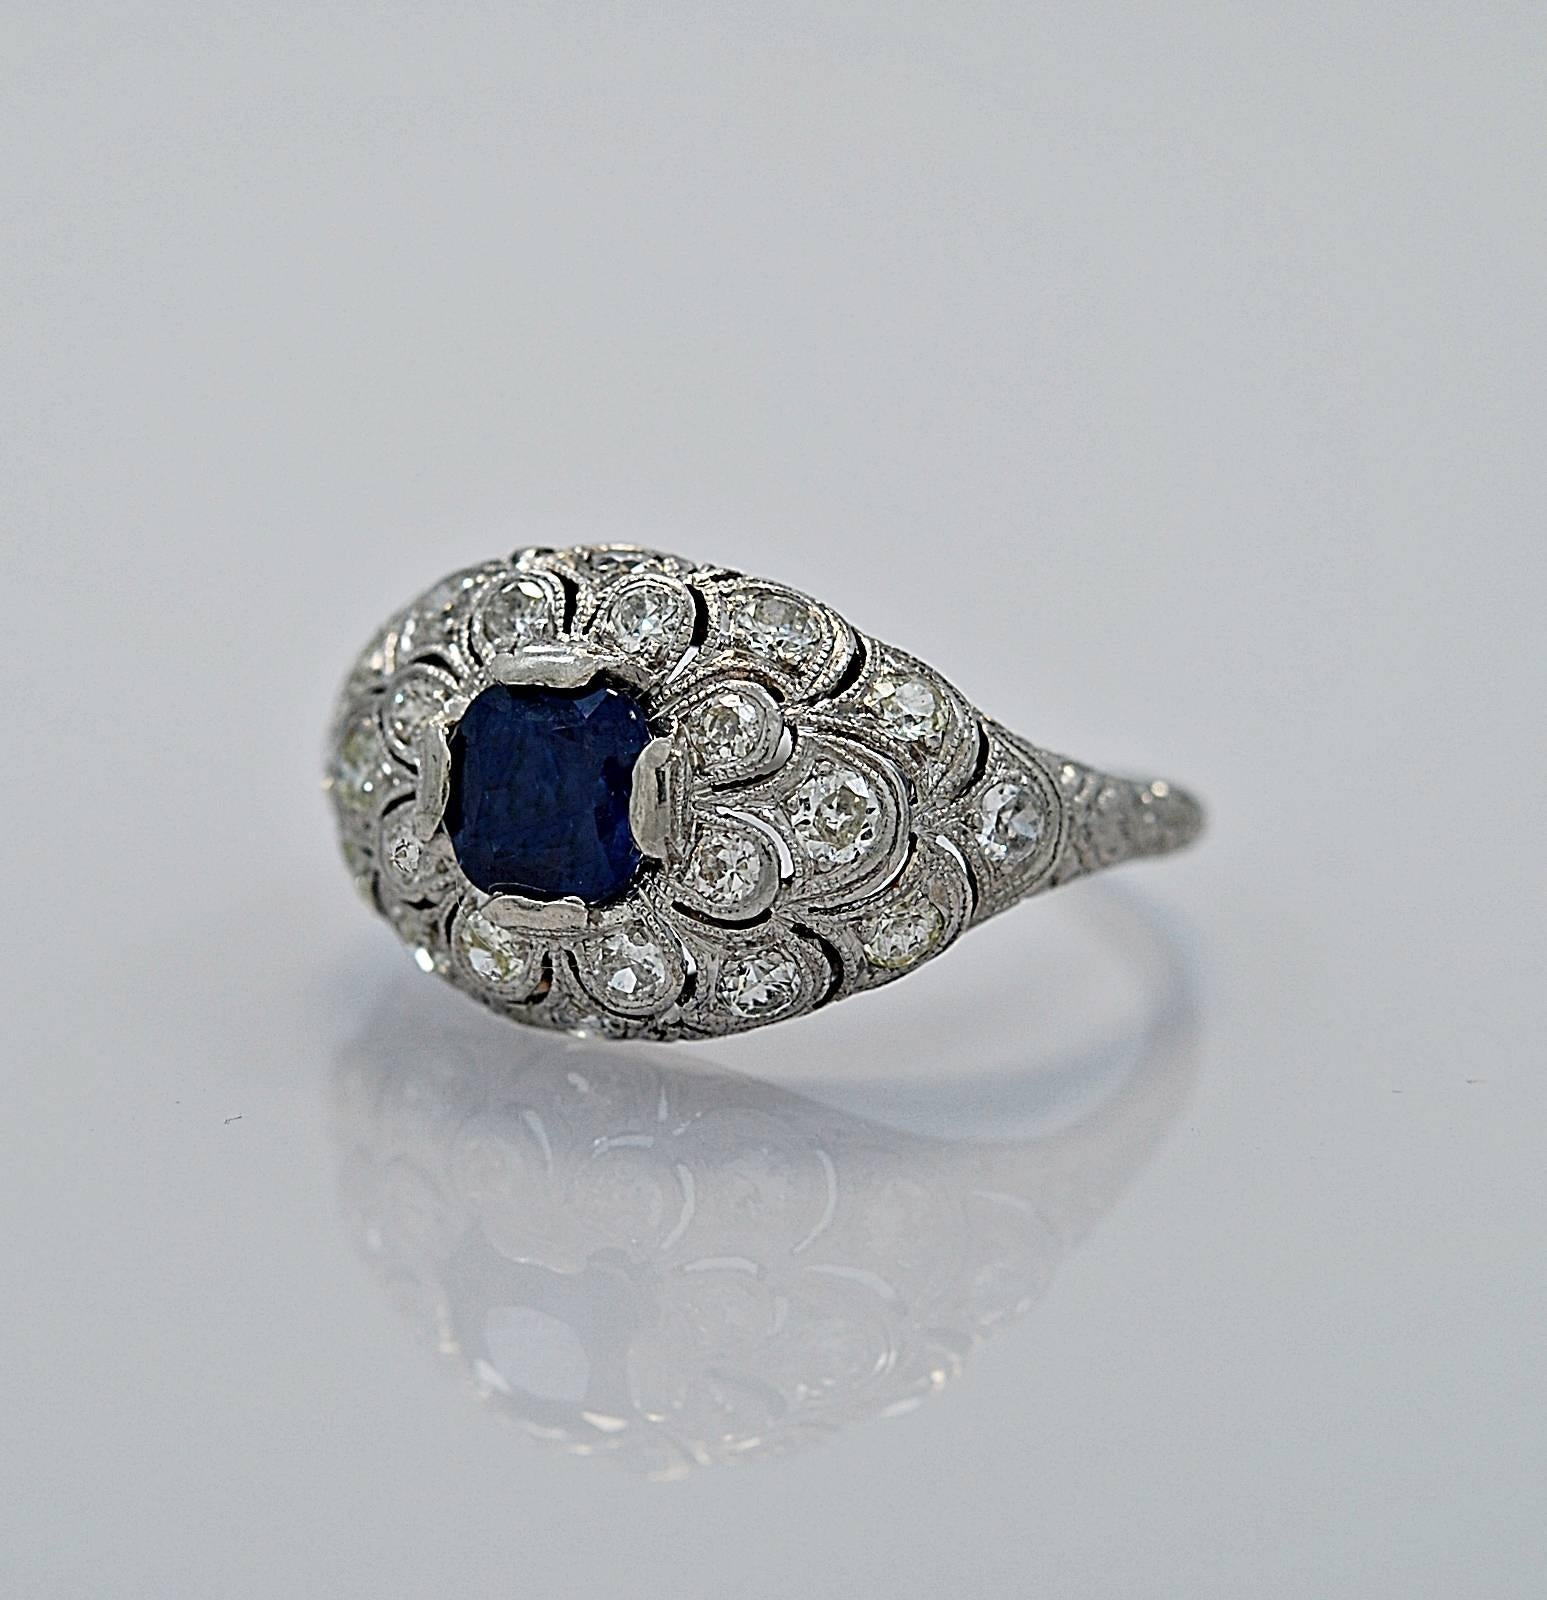 In our Tampa store, this item has a retail price of $6,995.

An exquisitely detailed platinum sapphire and diamond vintage engagement ring featuring a .85ct. apx. sapphire with no indications of heat treatment. It also has .63ct. apx. of diamond